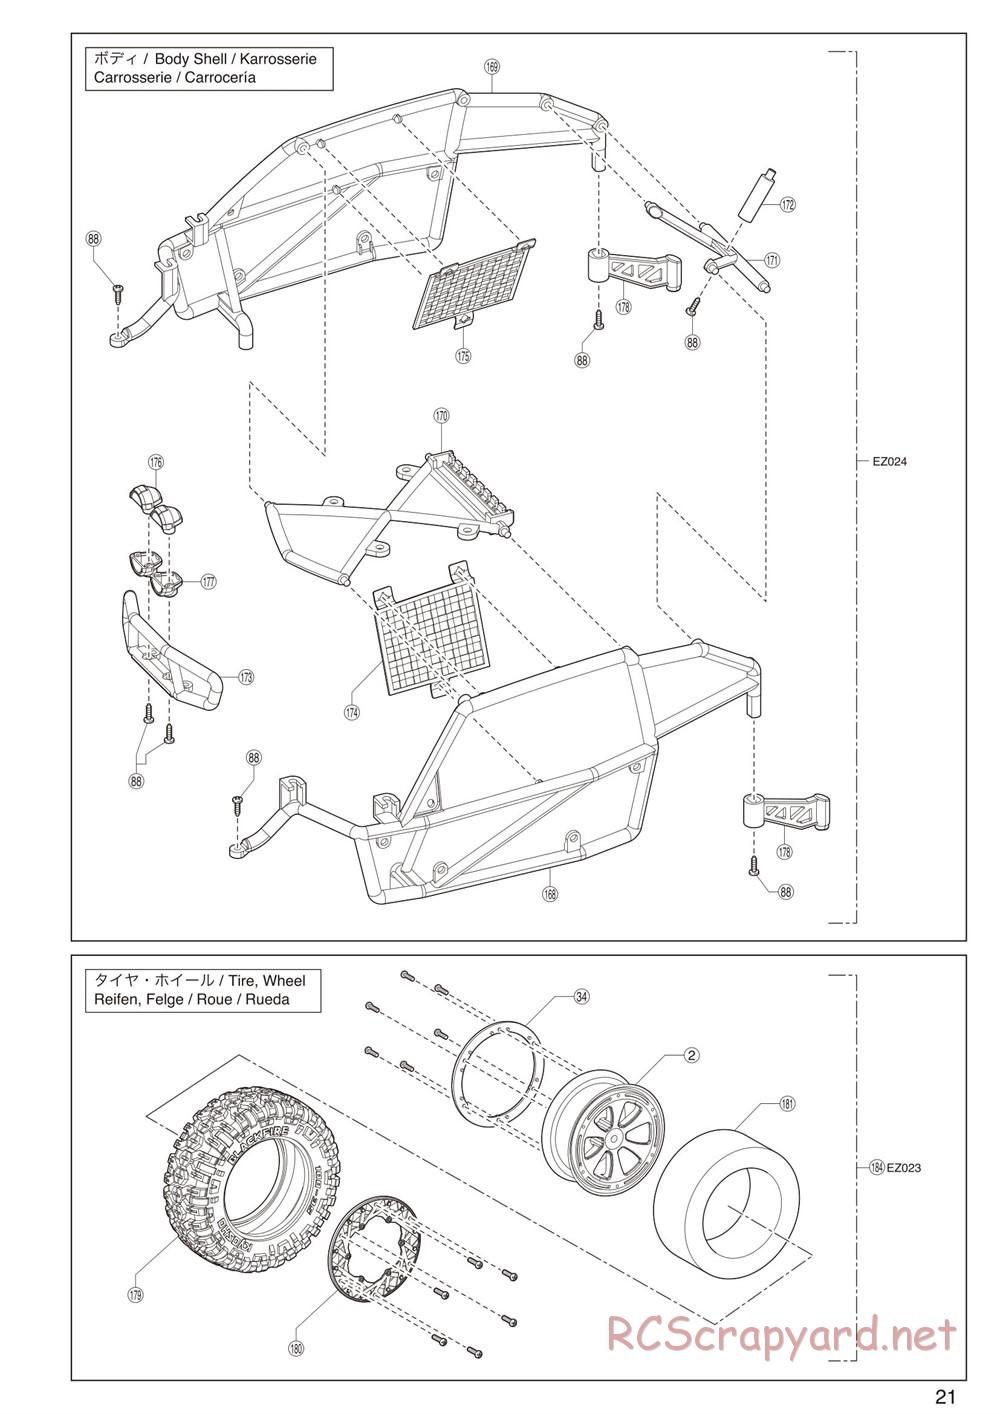 Kyosho - Axxe 2WD Desert Buggy - Manual - Page 20